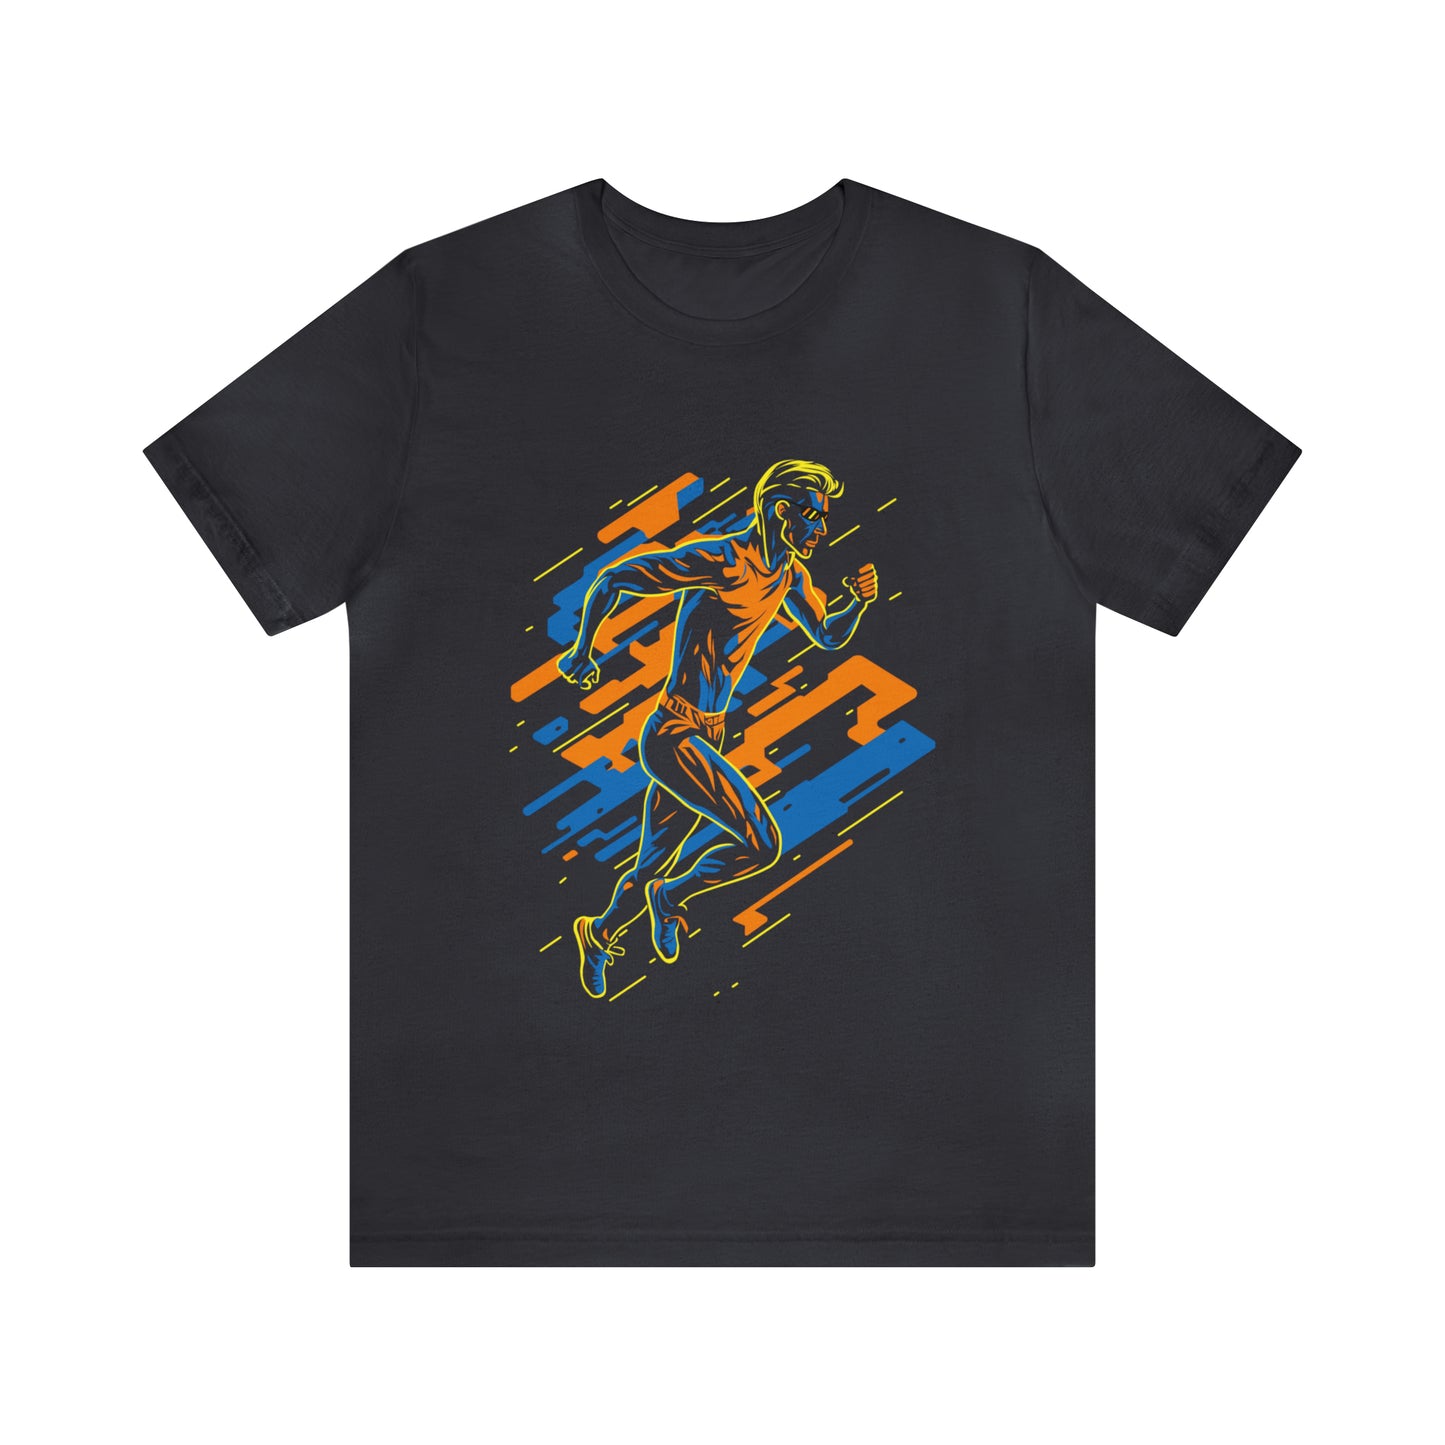 Dark Grey T-Shirt featuring a vibrant and dynamic runner design, capturing the energy of a 'Running Man'. Taken from the TEQNEON Radioactive collection